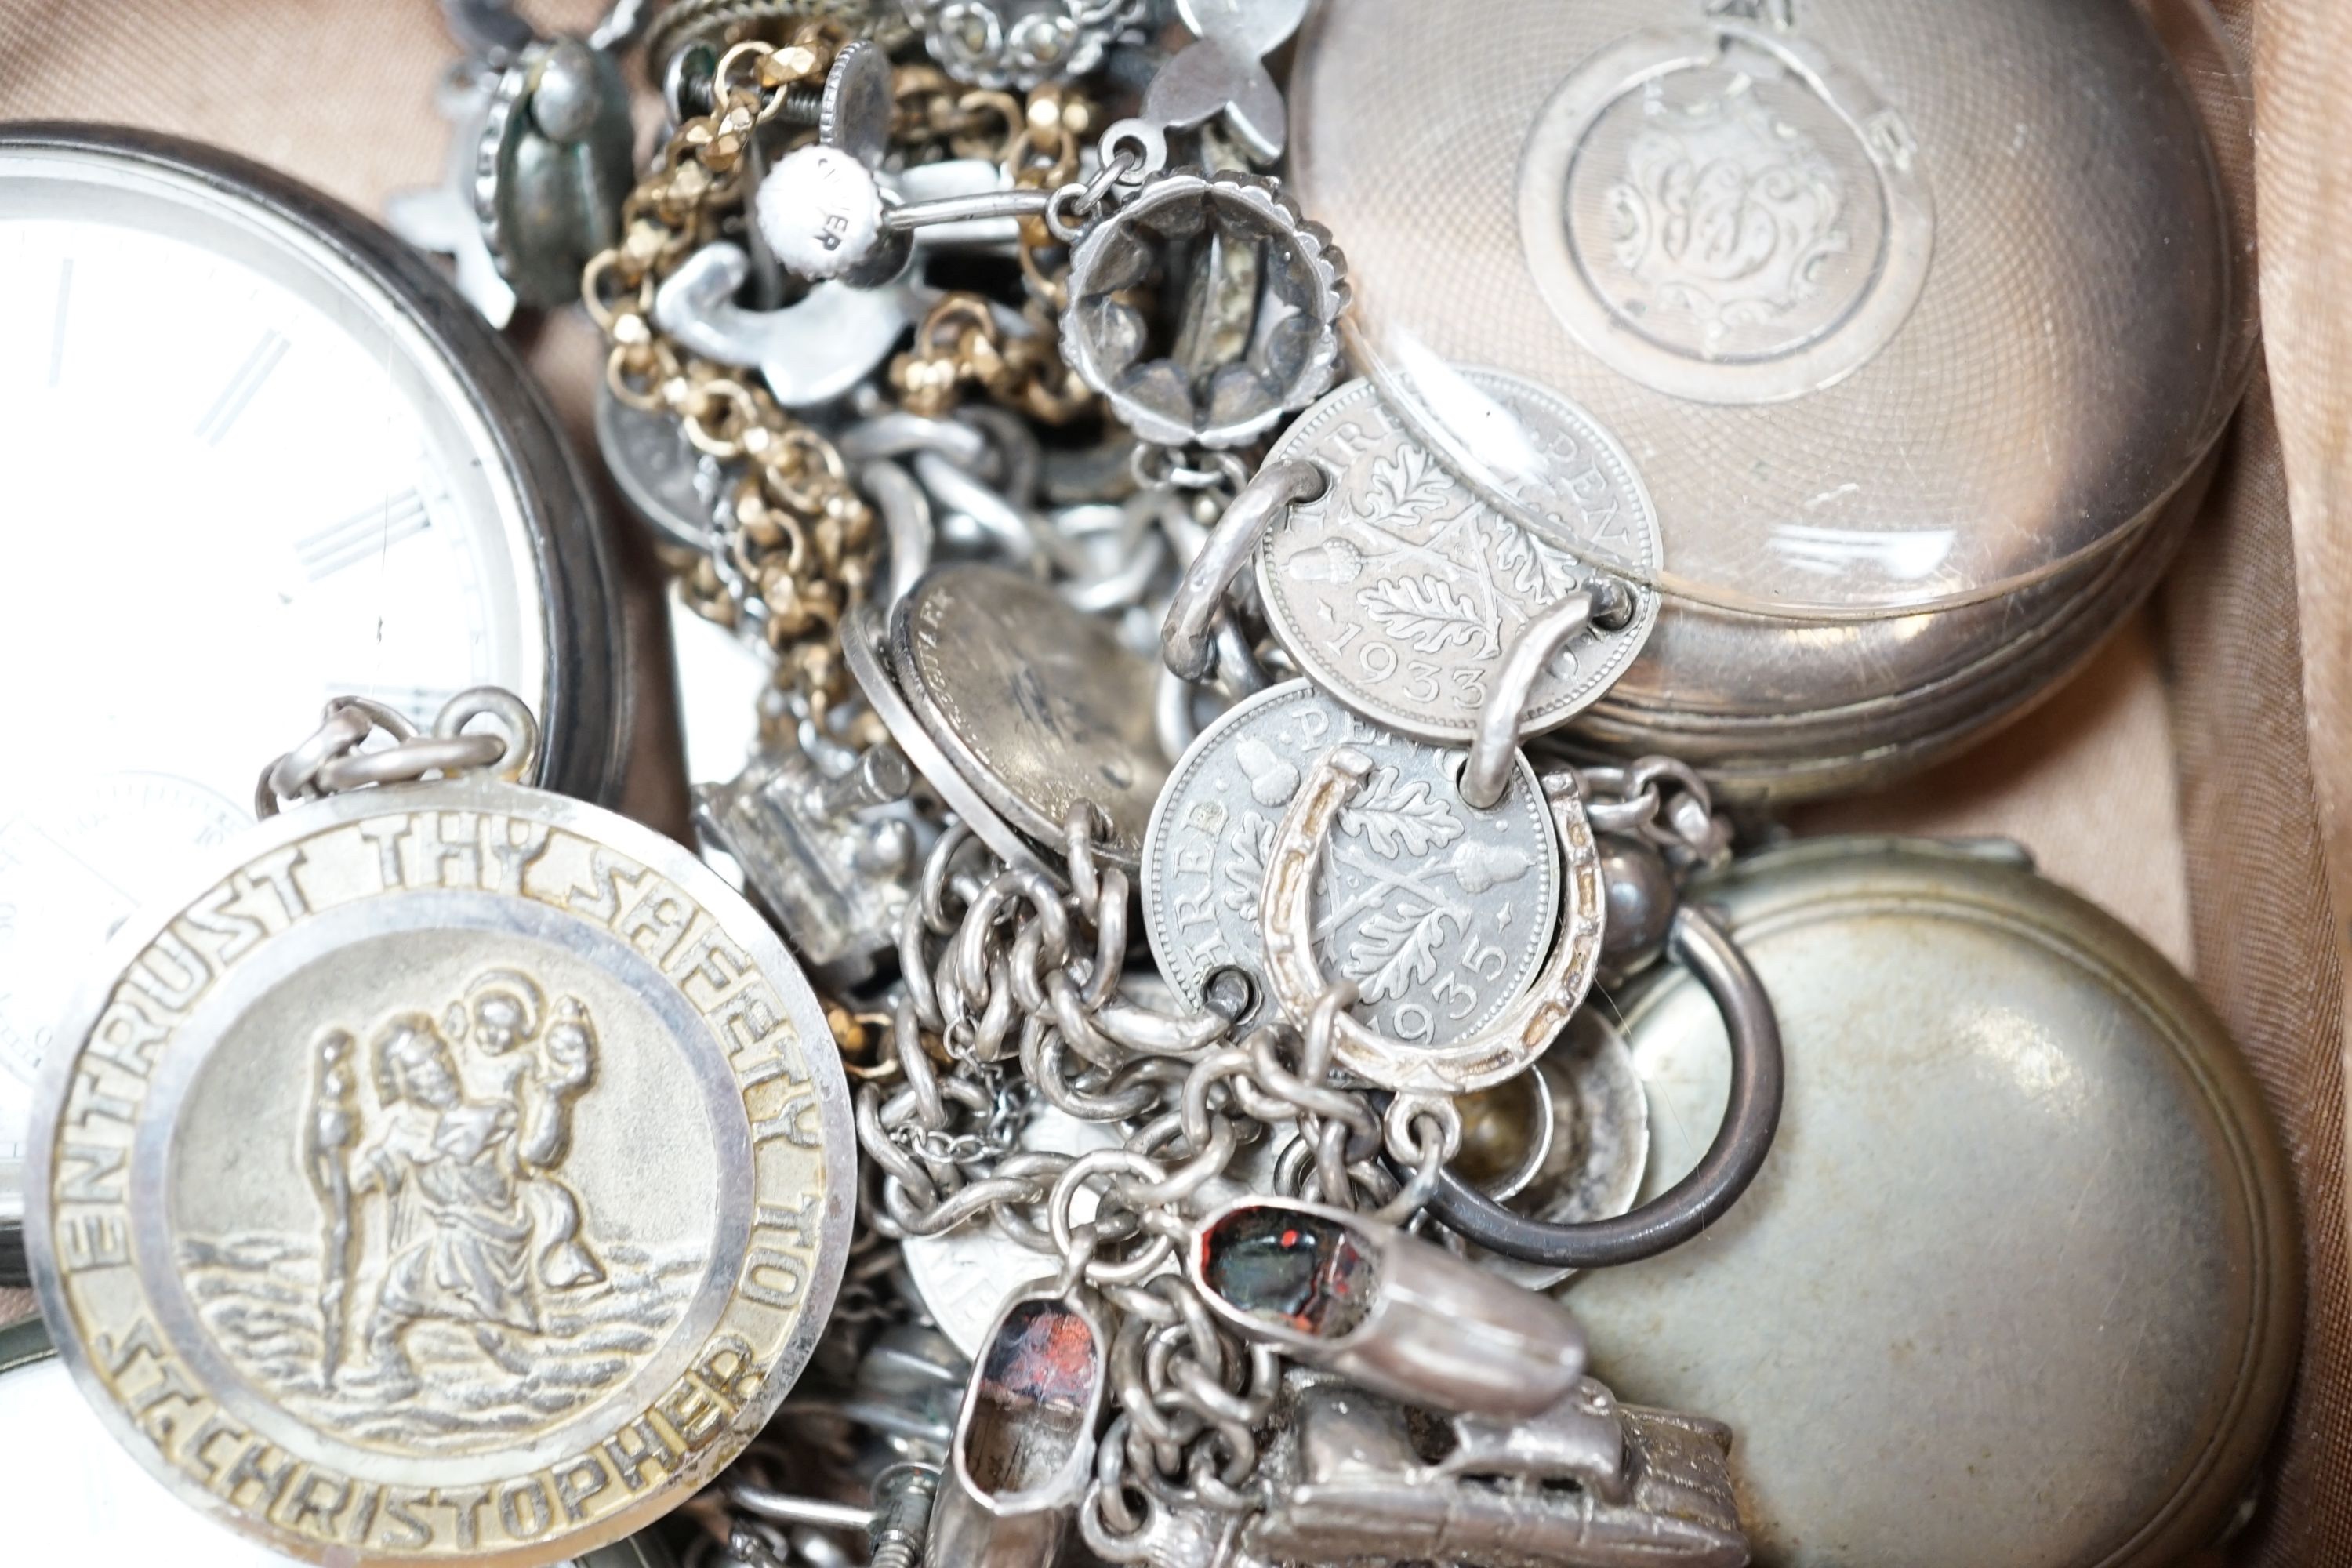 Two silver open face pocket watches, one other nickel cased pocket watch, two fob watches and minor jewellery including paste ear clips and a sterling charm bracelet.